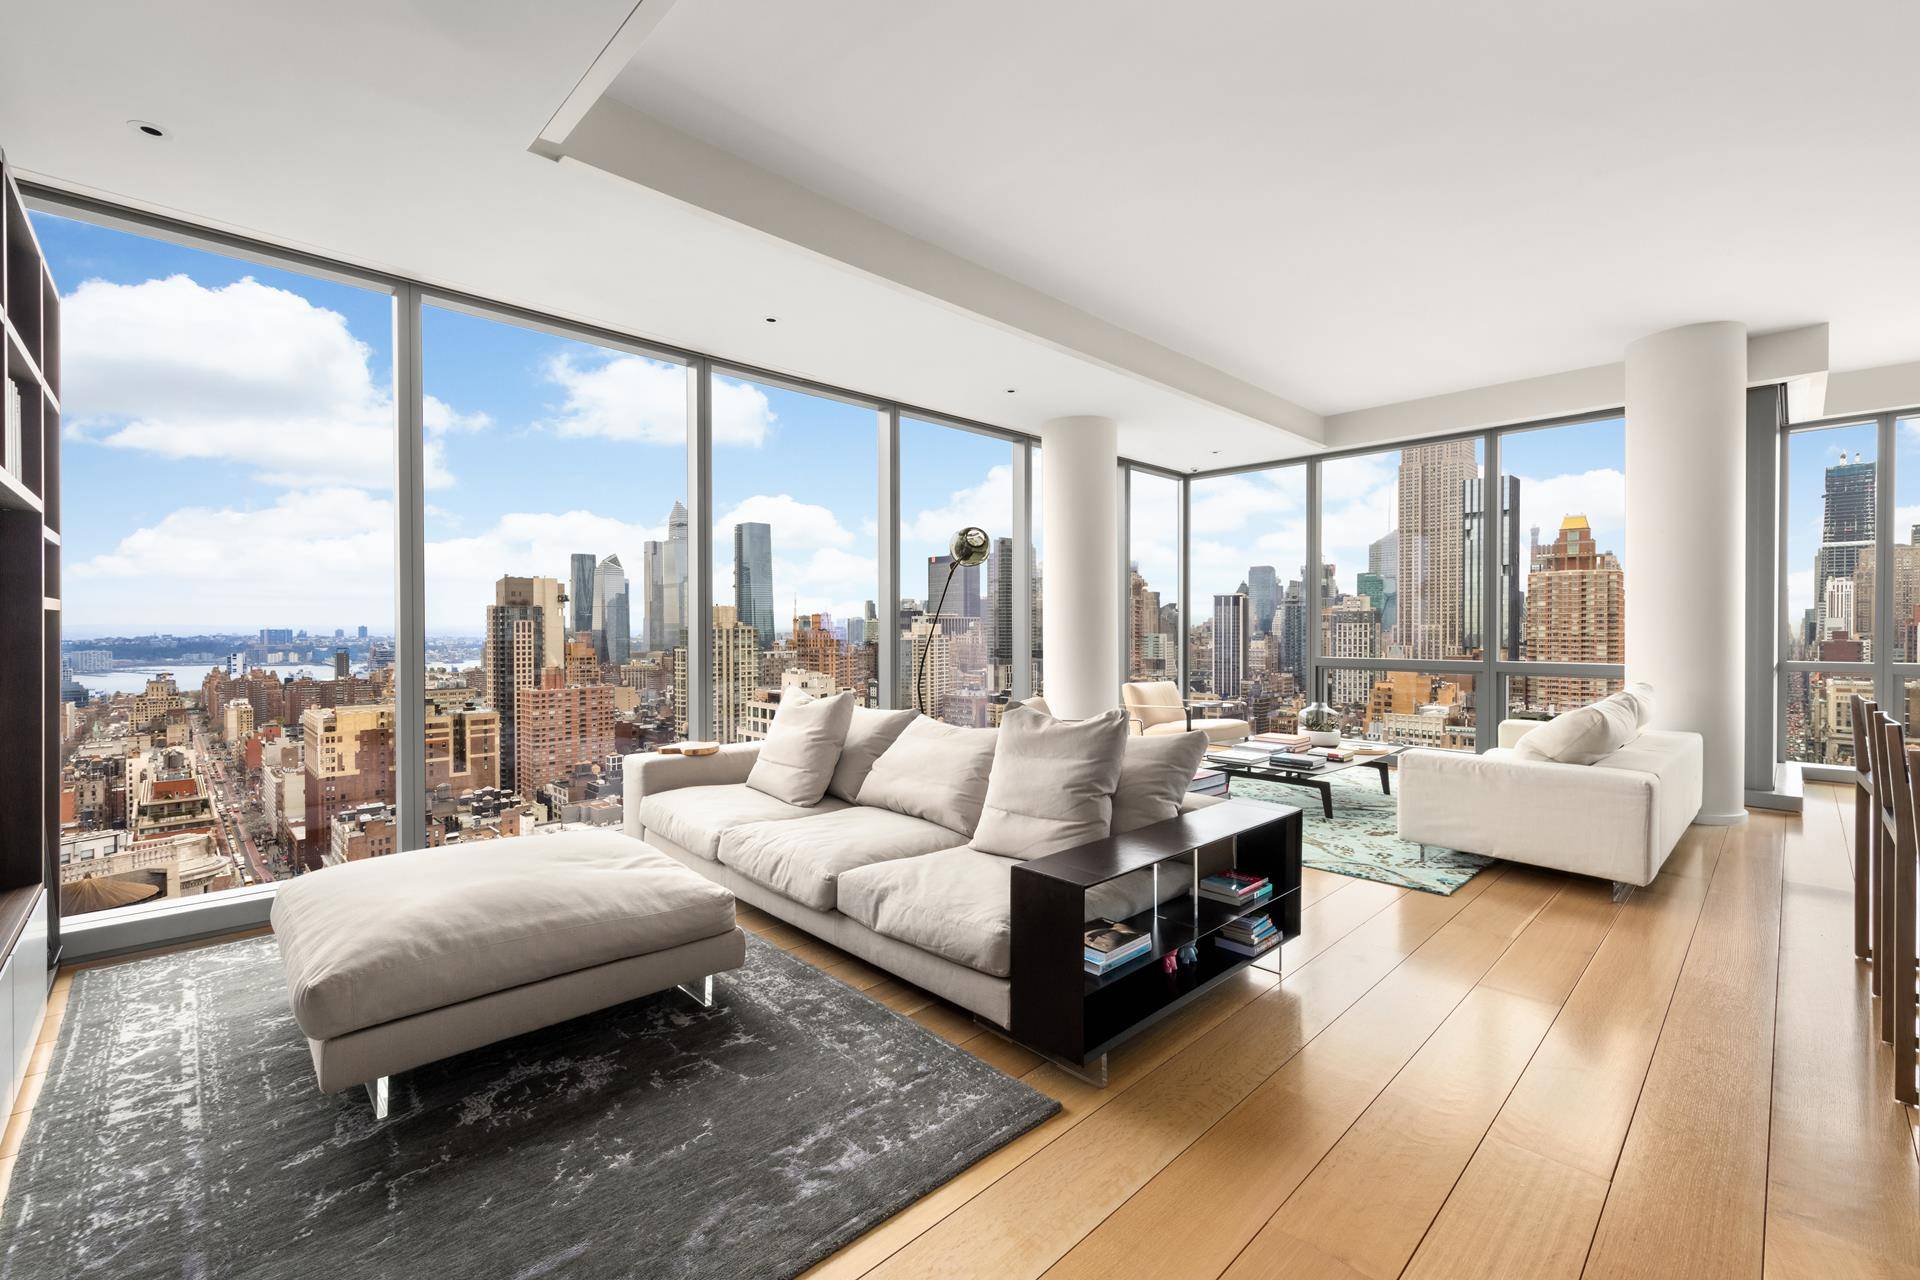 An unparalleled luxury living experience awaits you at the striking ultra modern One Madison condominium towering 60 stories over New York City !